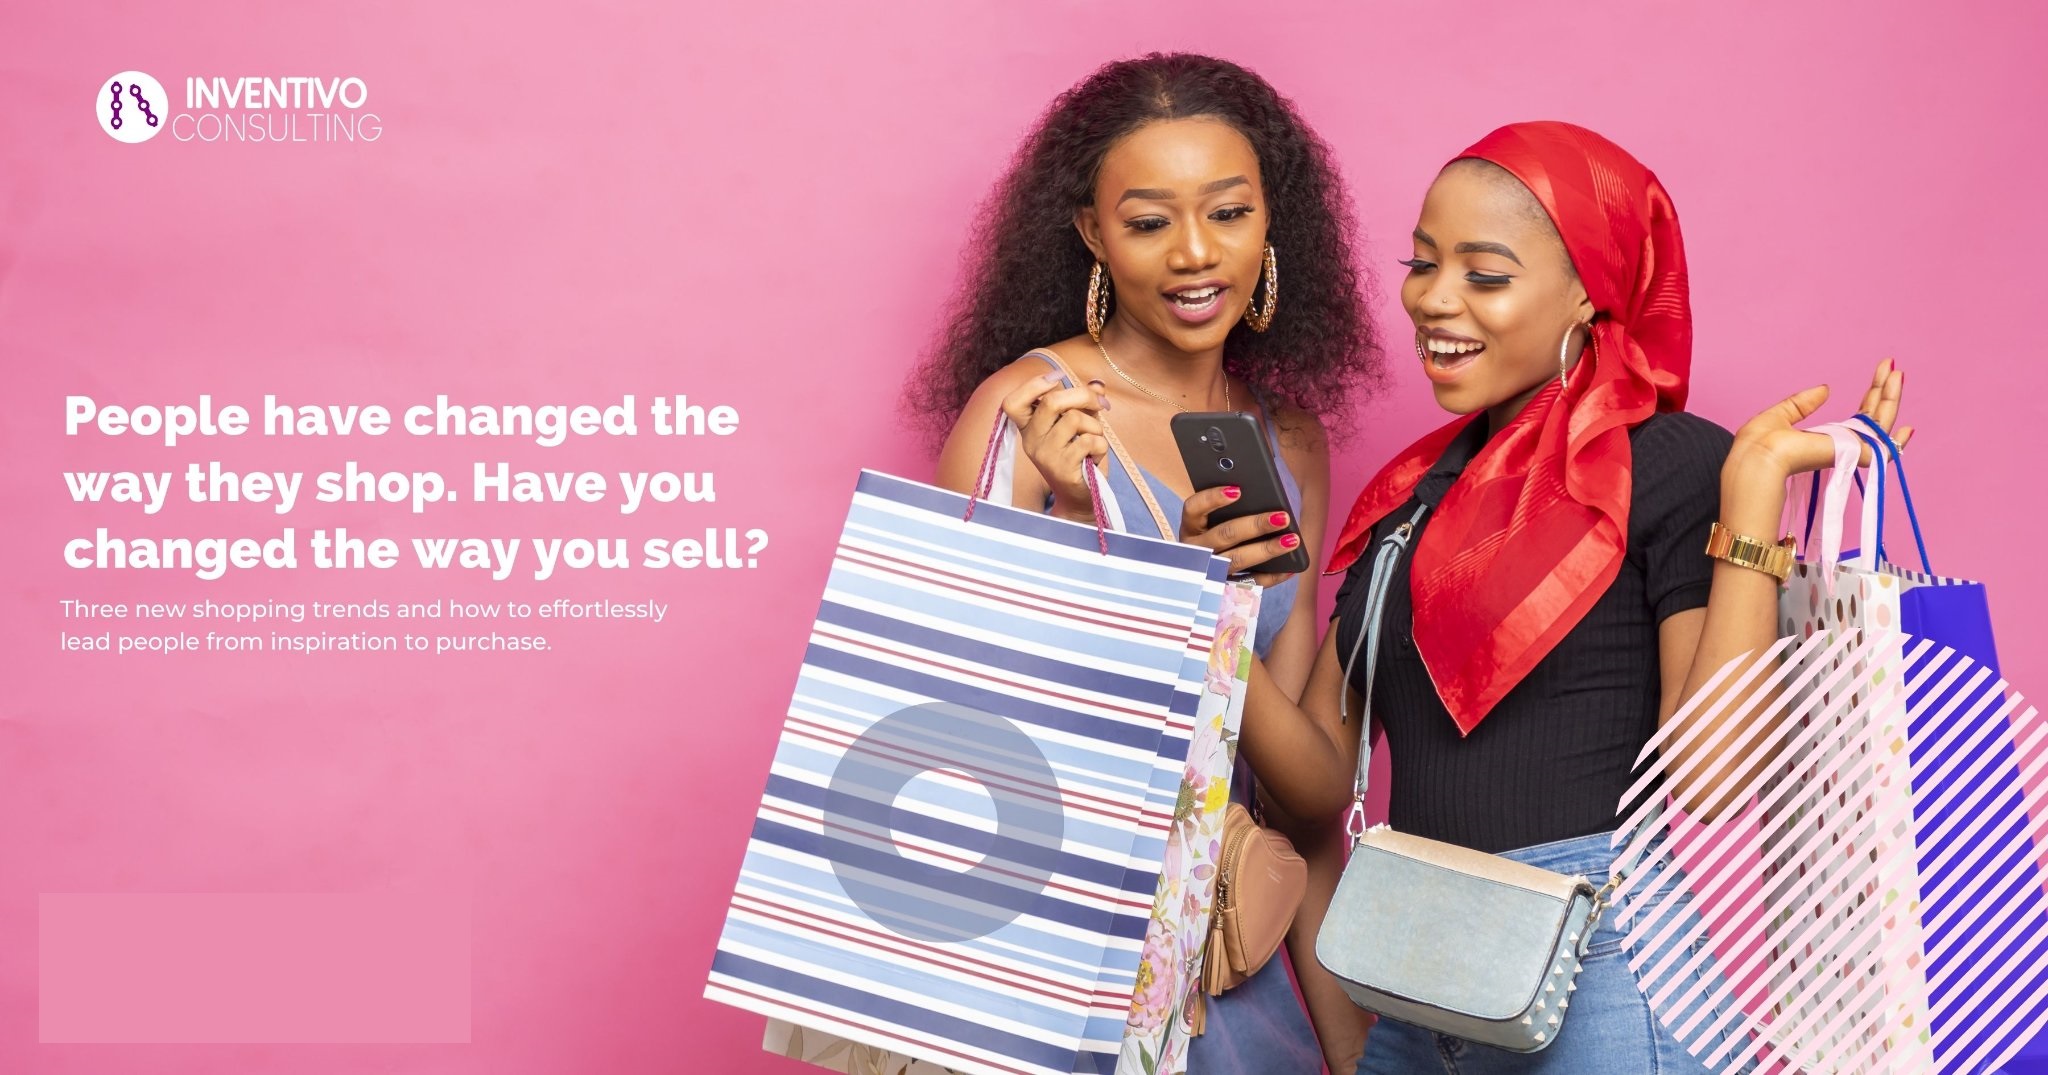 People have changed the way they shop. Have you changed the way you sell?